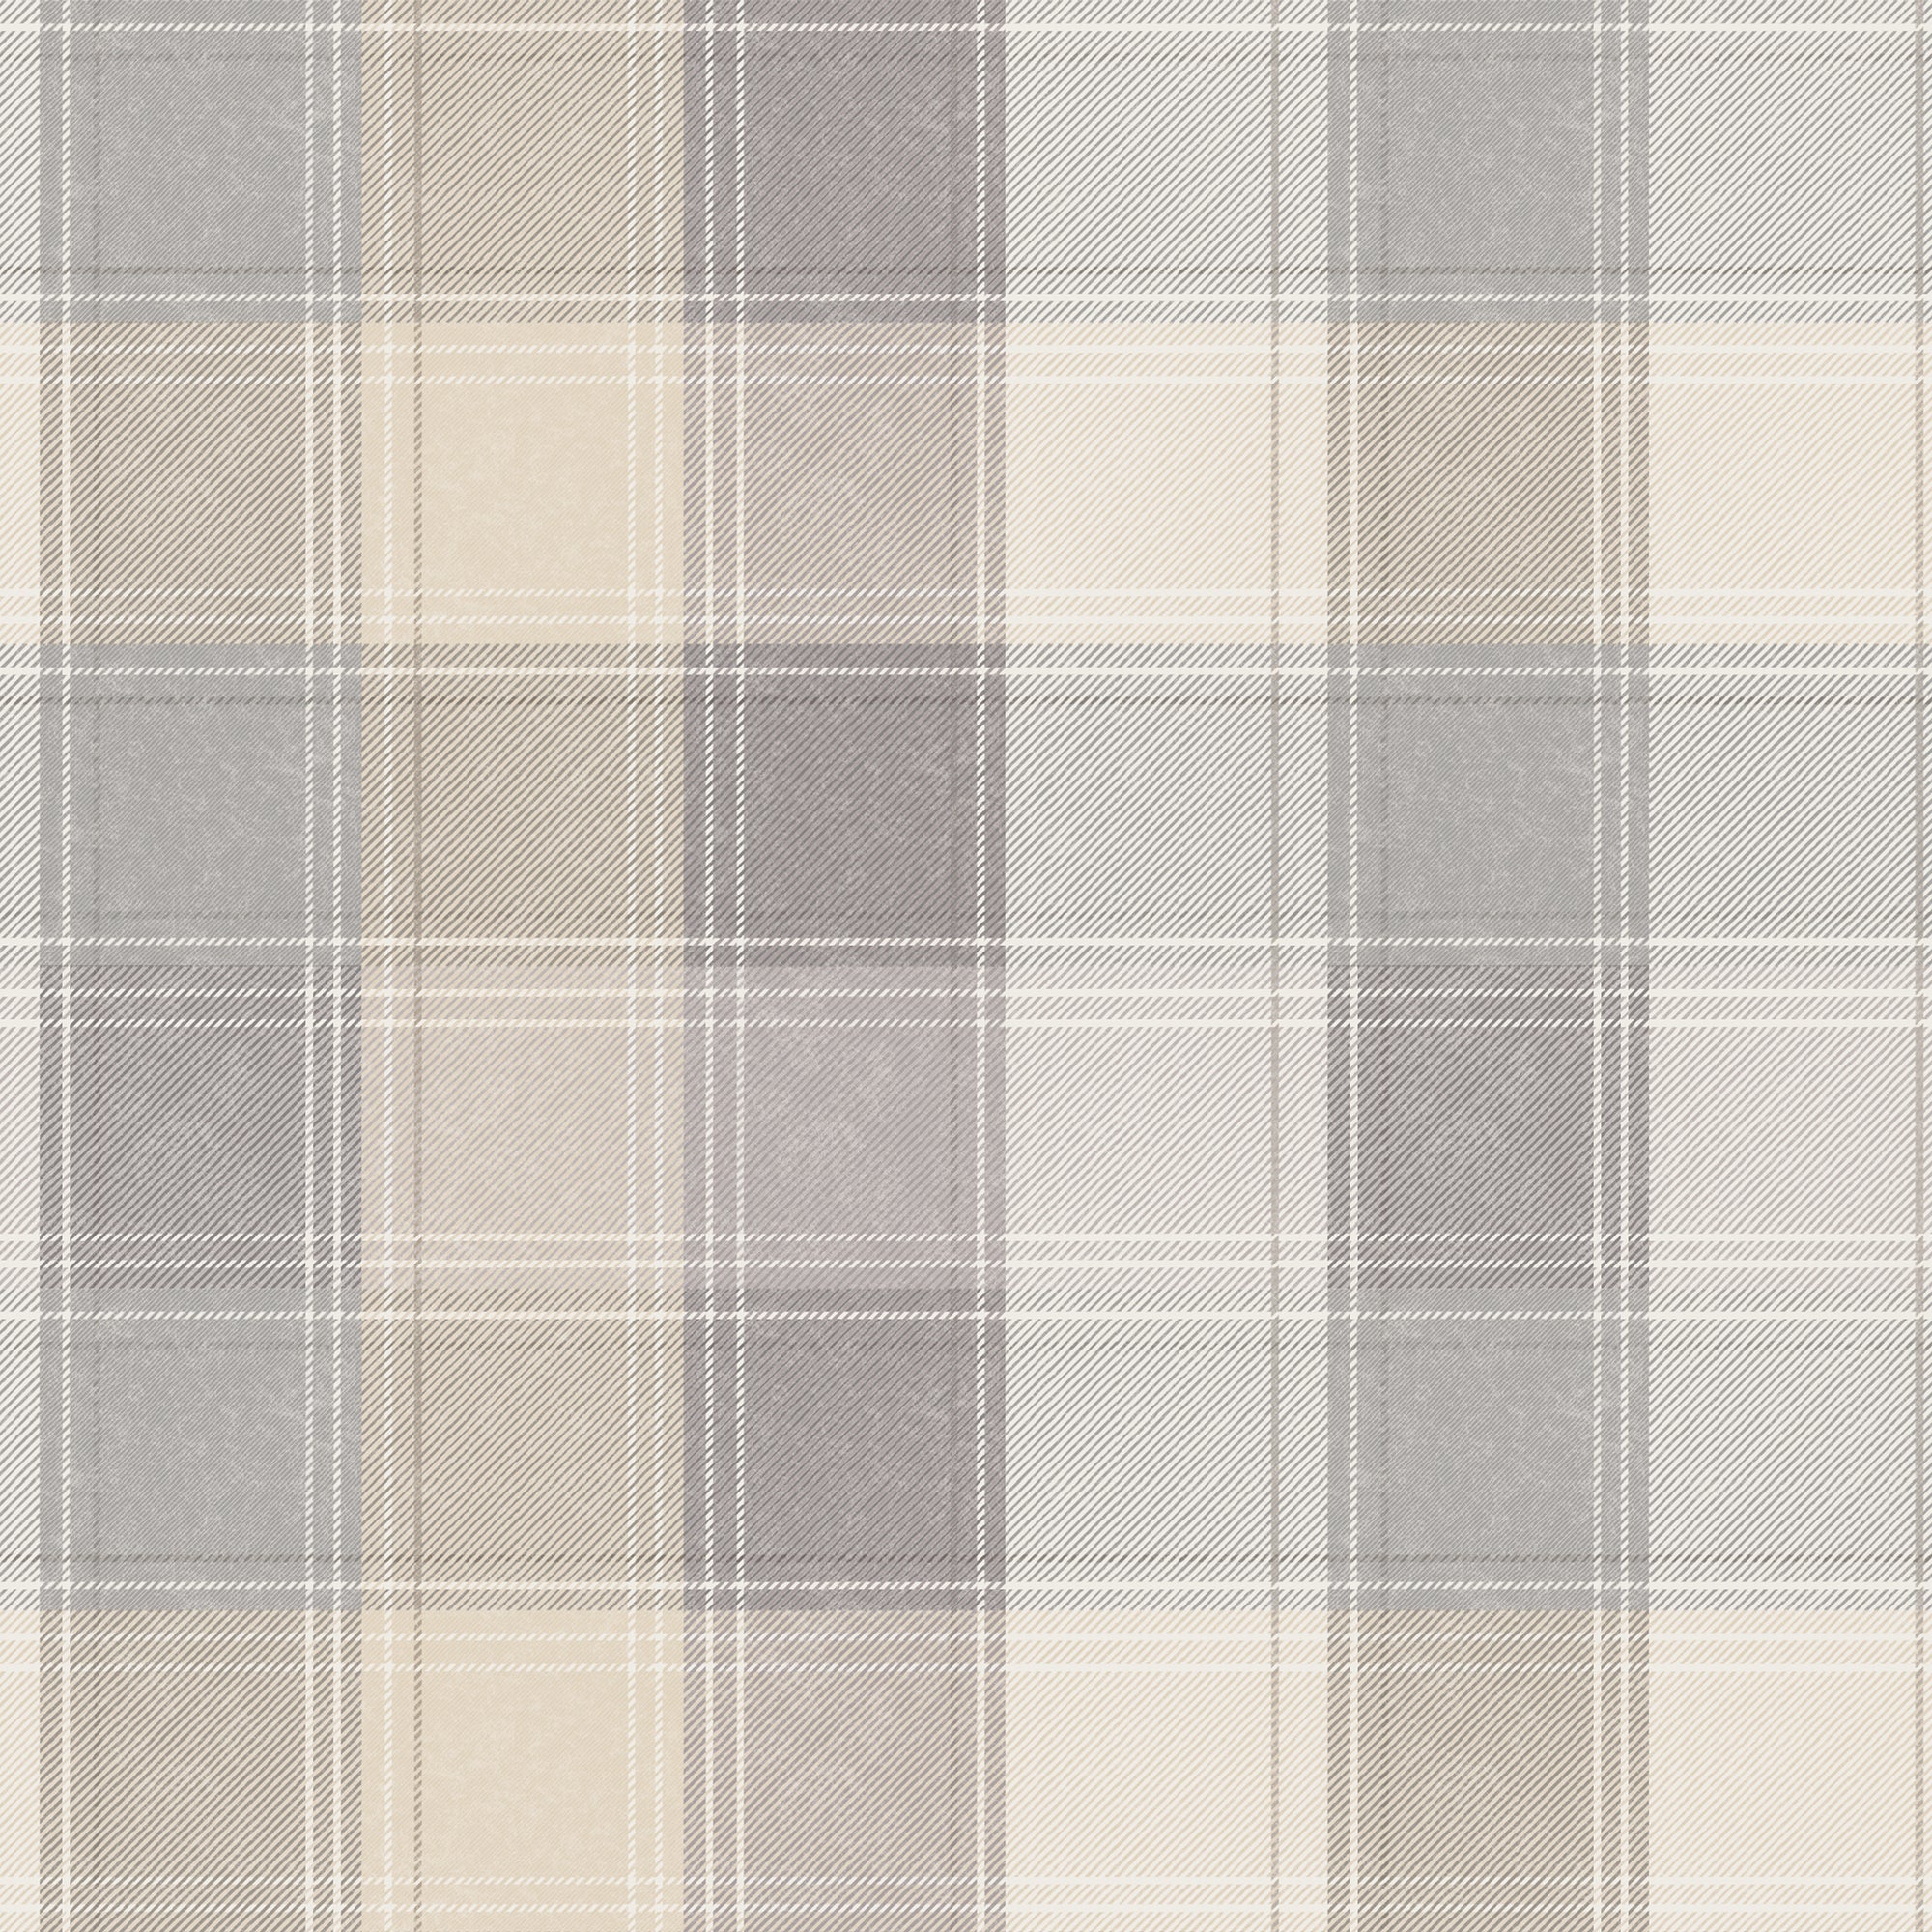 Country Check Wallpaper 901902 by Arthouse